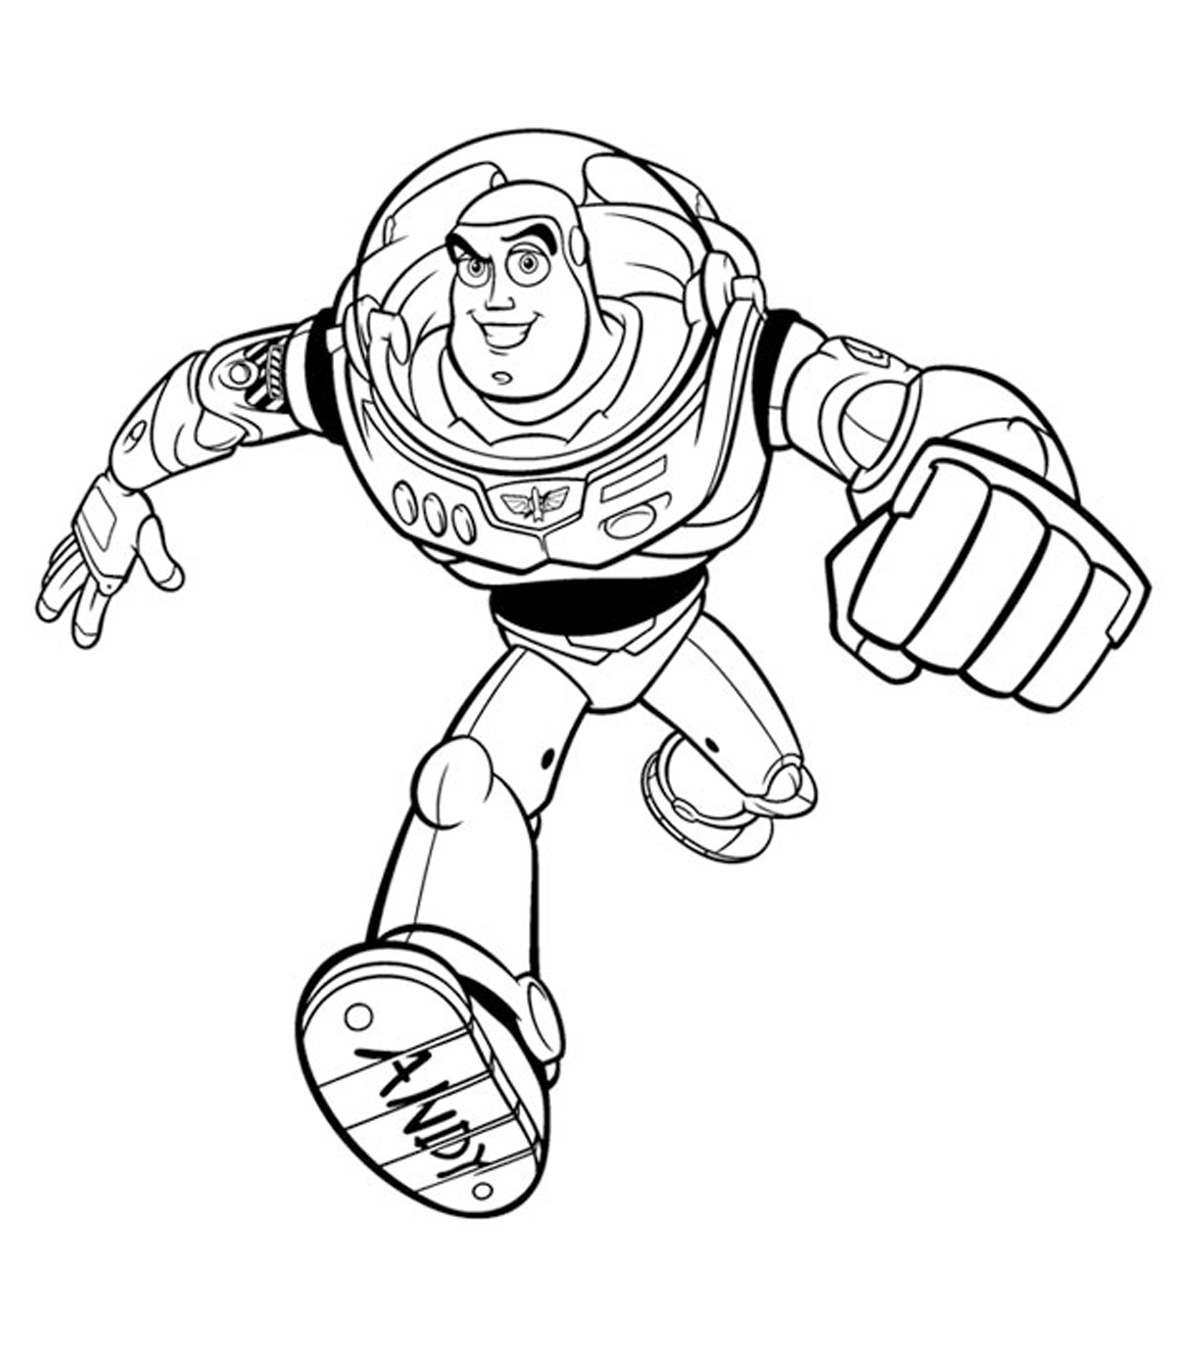 Top 17 Free Printable Toy Story Coloring Pages Online